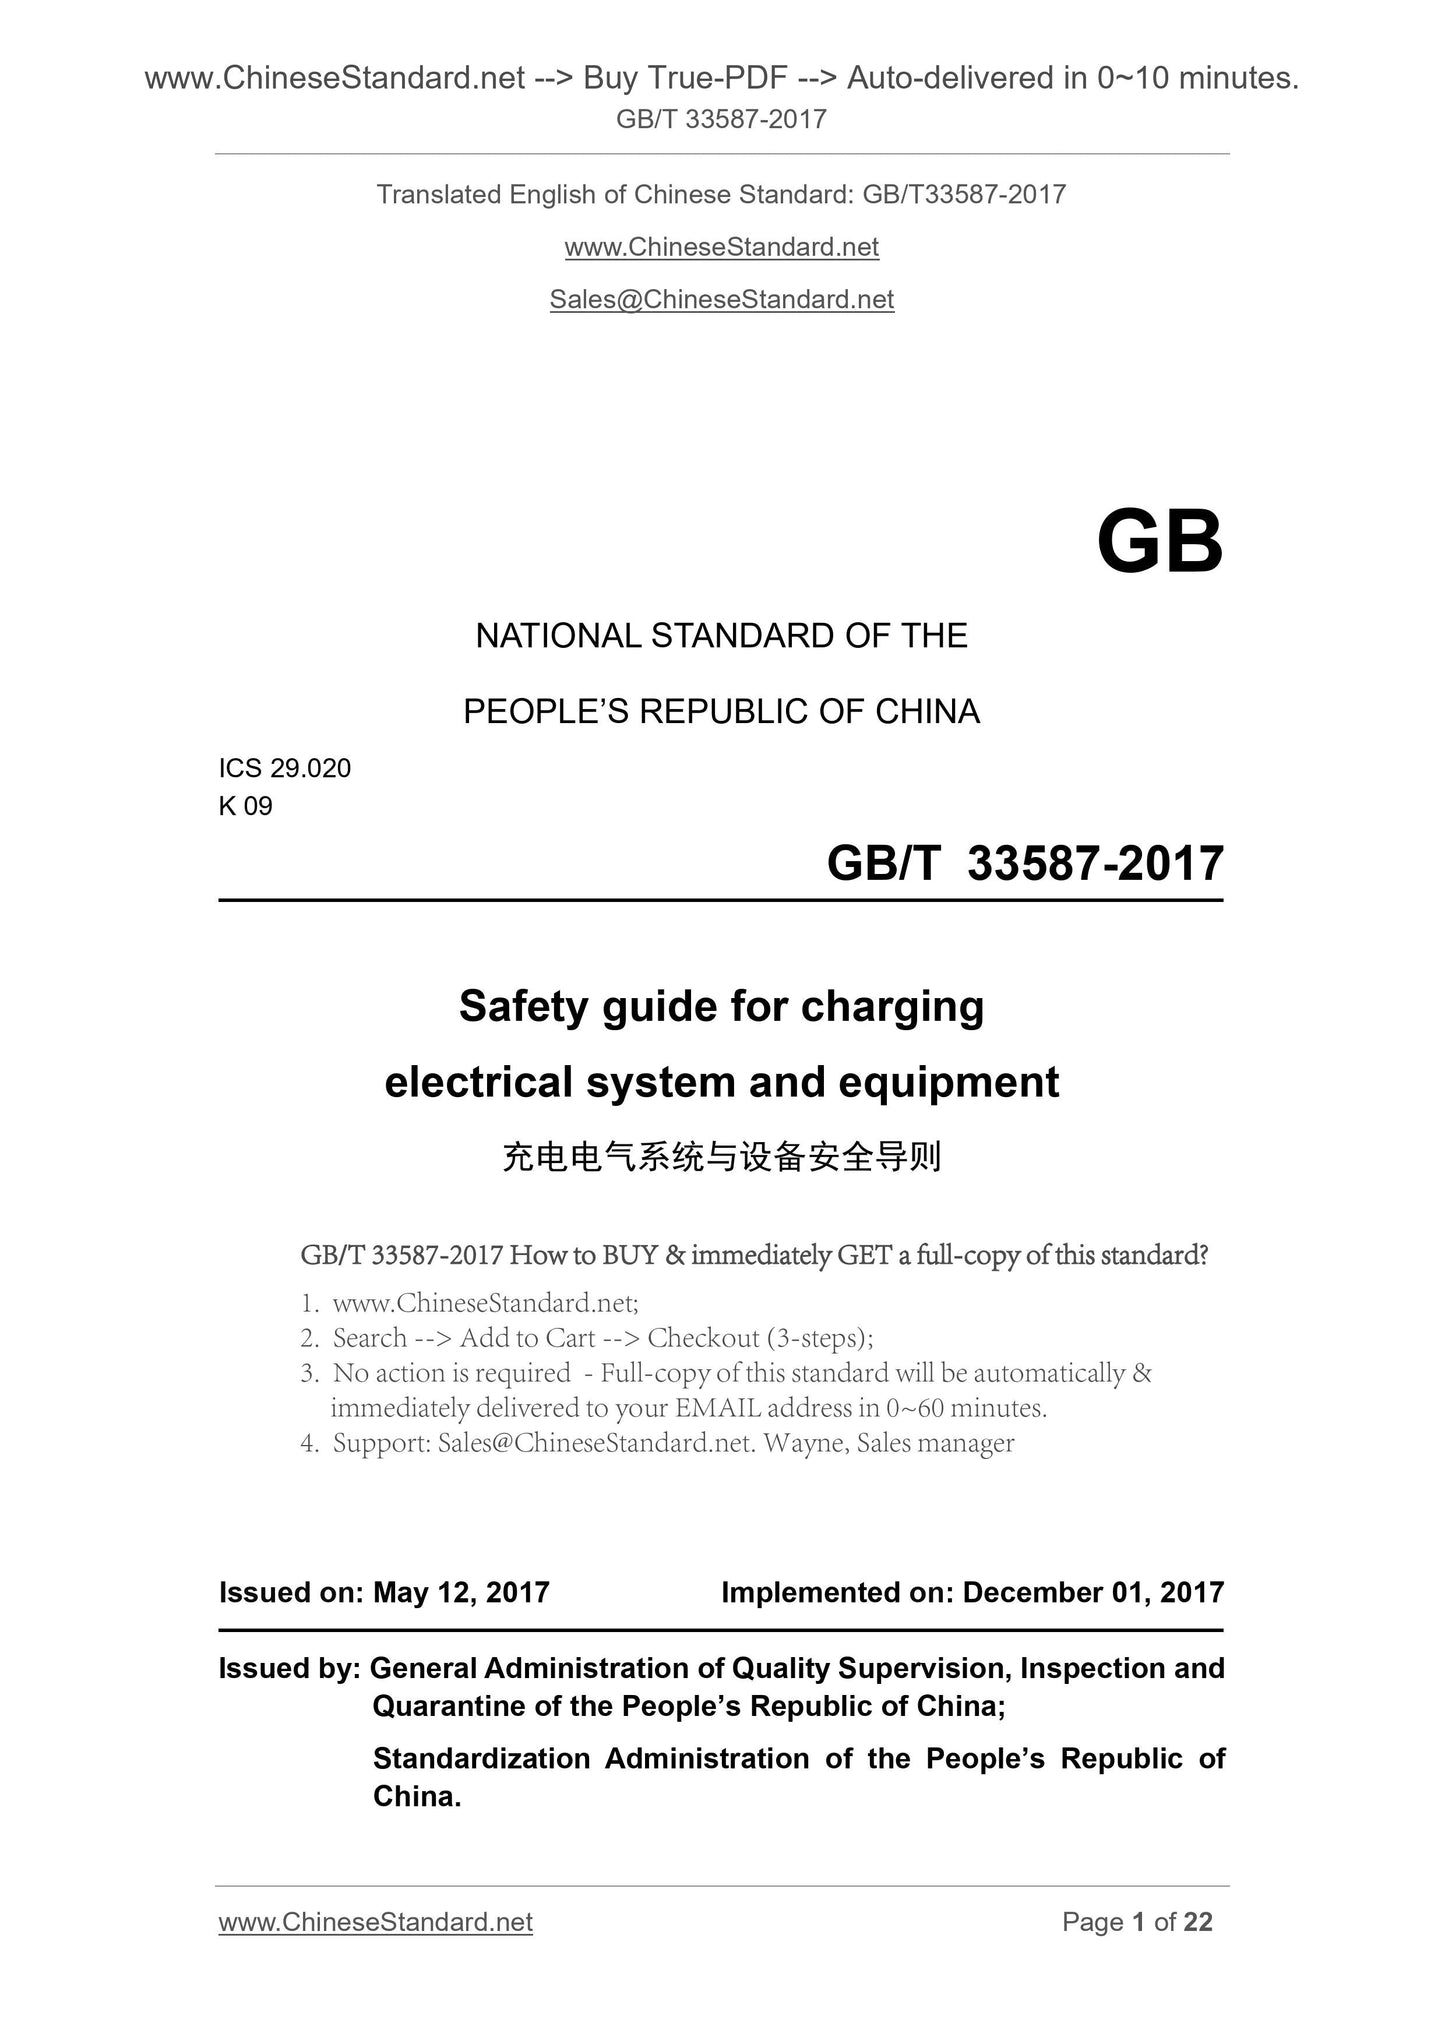 GB/T 33587-2017 Page 1